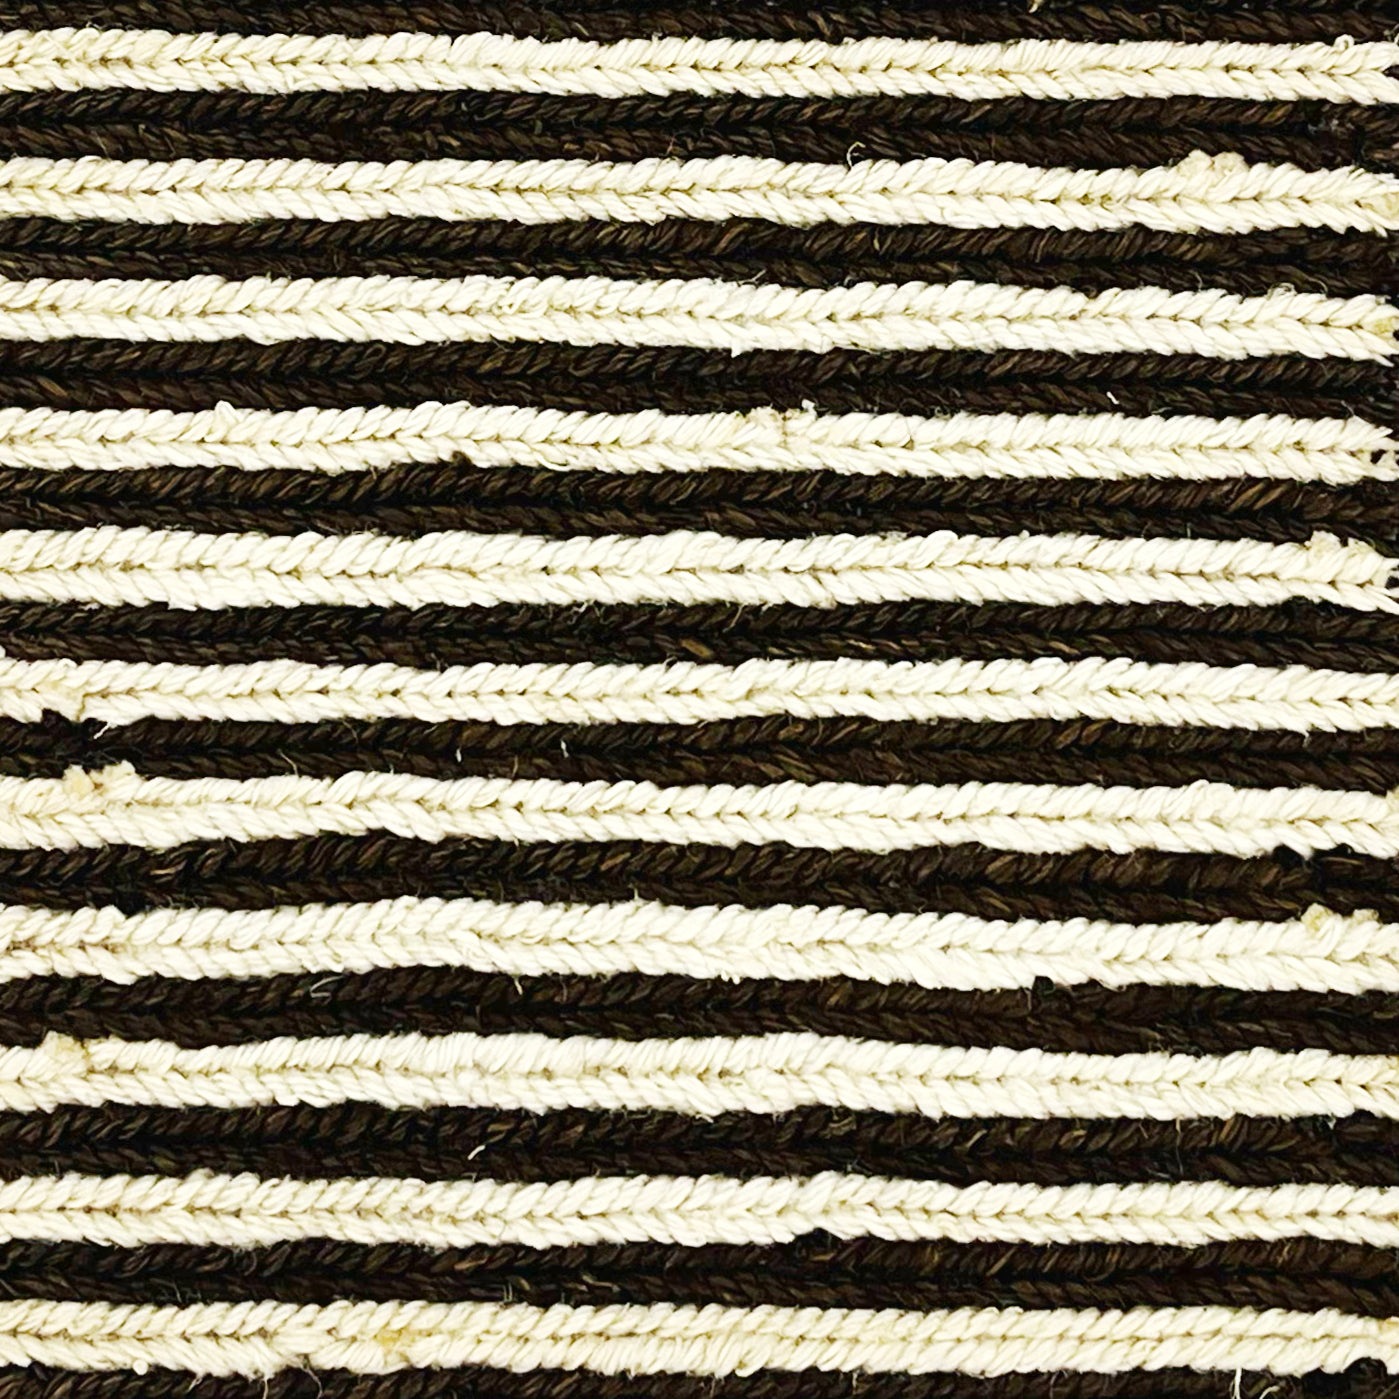 Woven rug swatch in natural fibers in a white and dark brown stripe pattern